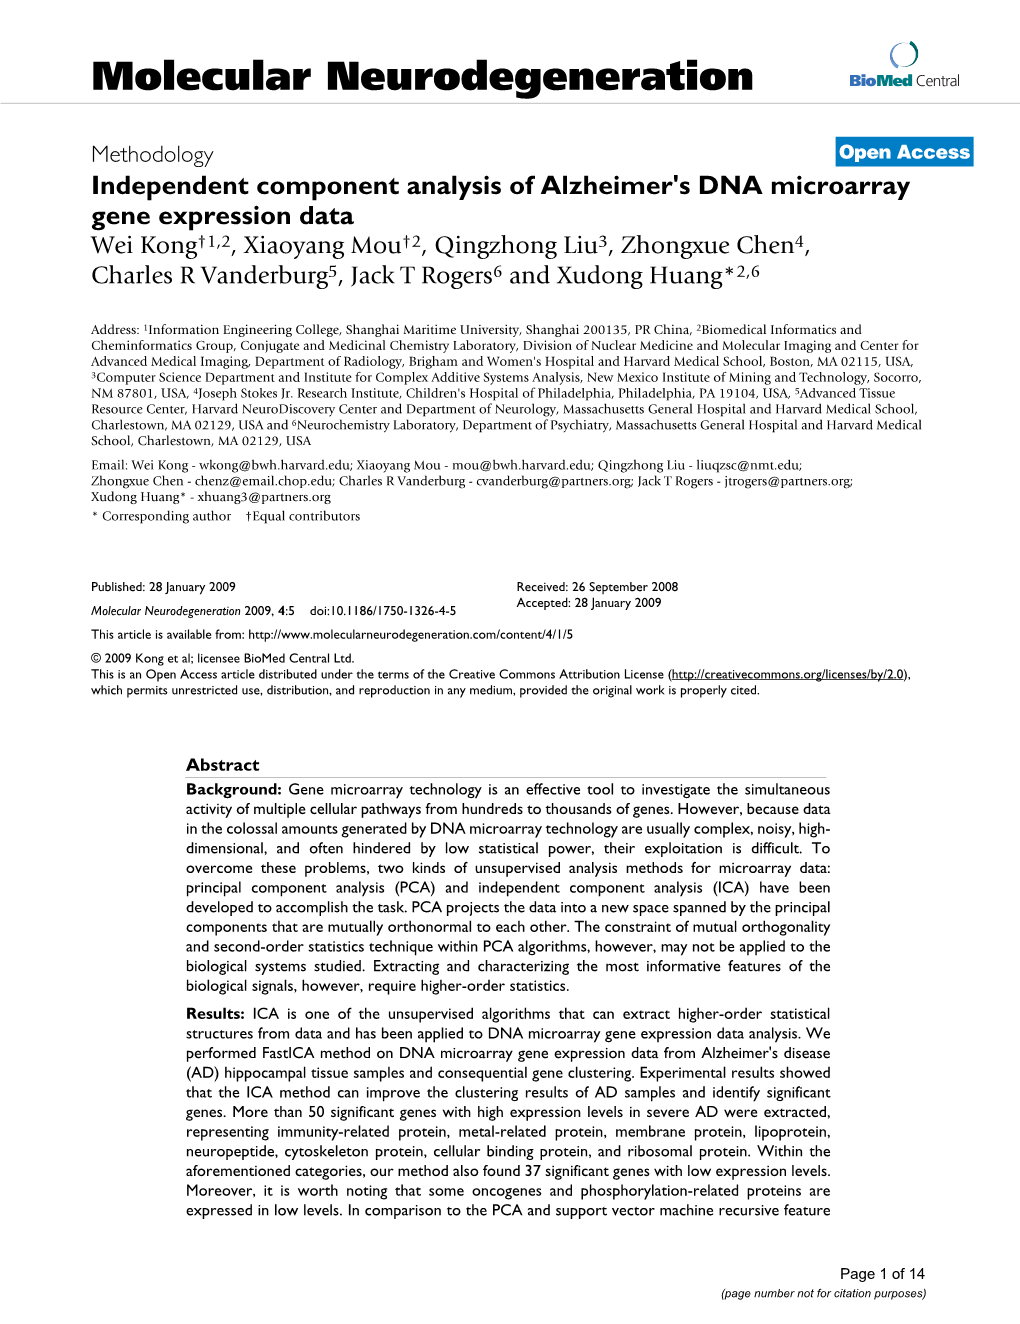 Independent Component Analysis of Alzheimer's DNA Microarray Gene